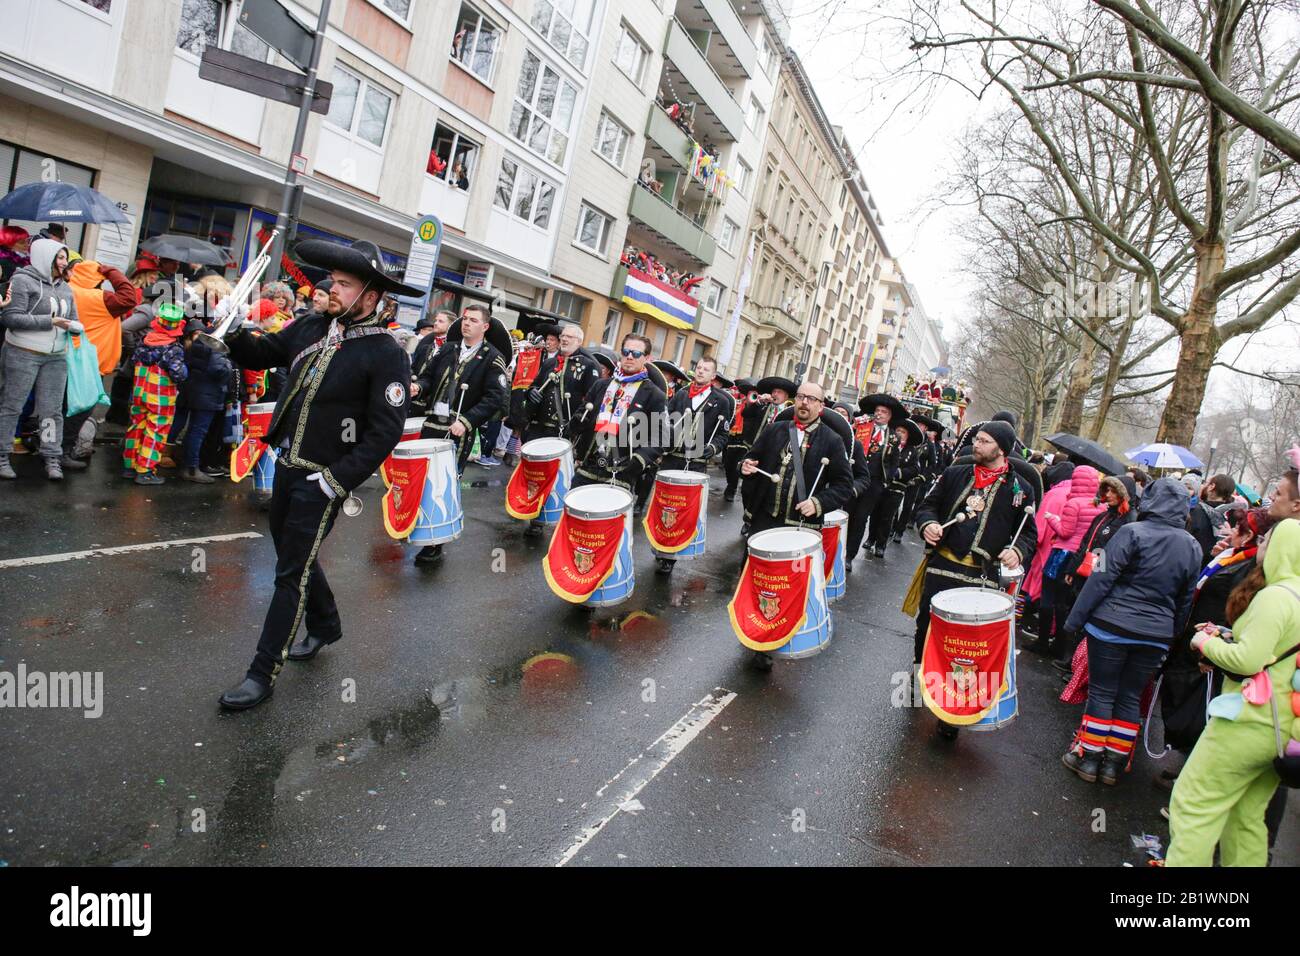 Mainz, Germany. 24th February 2020. Members of the fanfare band Fanfarenzug Graf-Zeppelin Friedrichshafen in the Mainz Rose Monday parade. Around half a million people lined the streets of Mainz for the traditional Rose Monday Carnival Parade. The 9 km long parade with over 9,000 participants is one of the three large Rose Monday Parades in Germany. Stock Photo